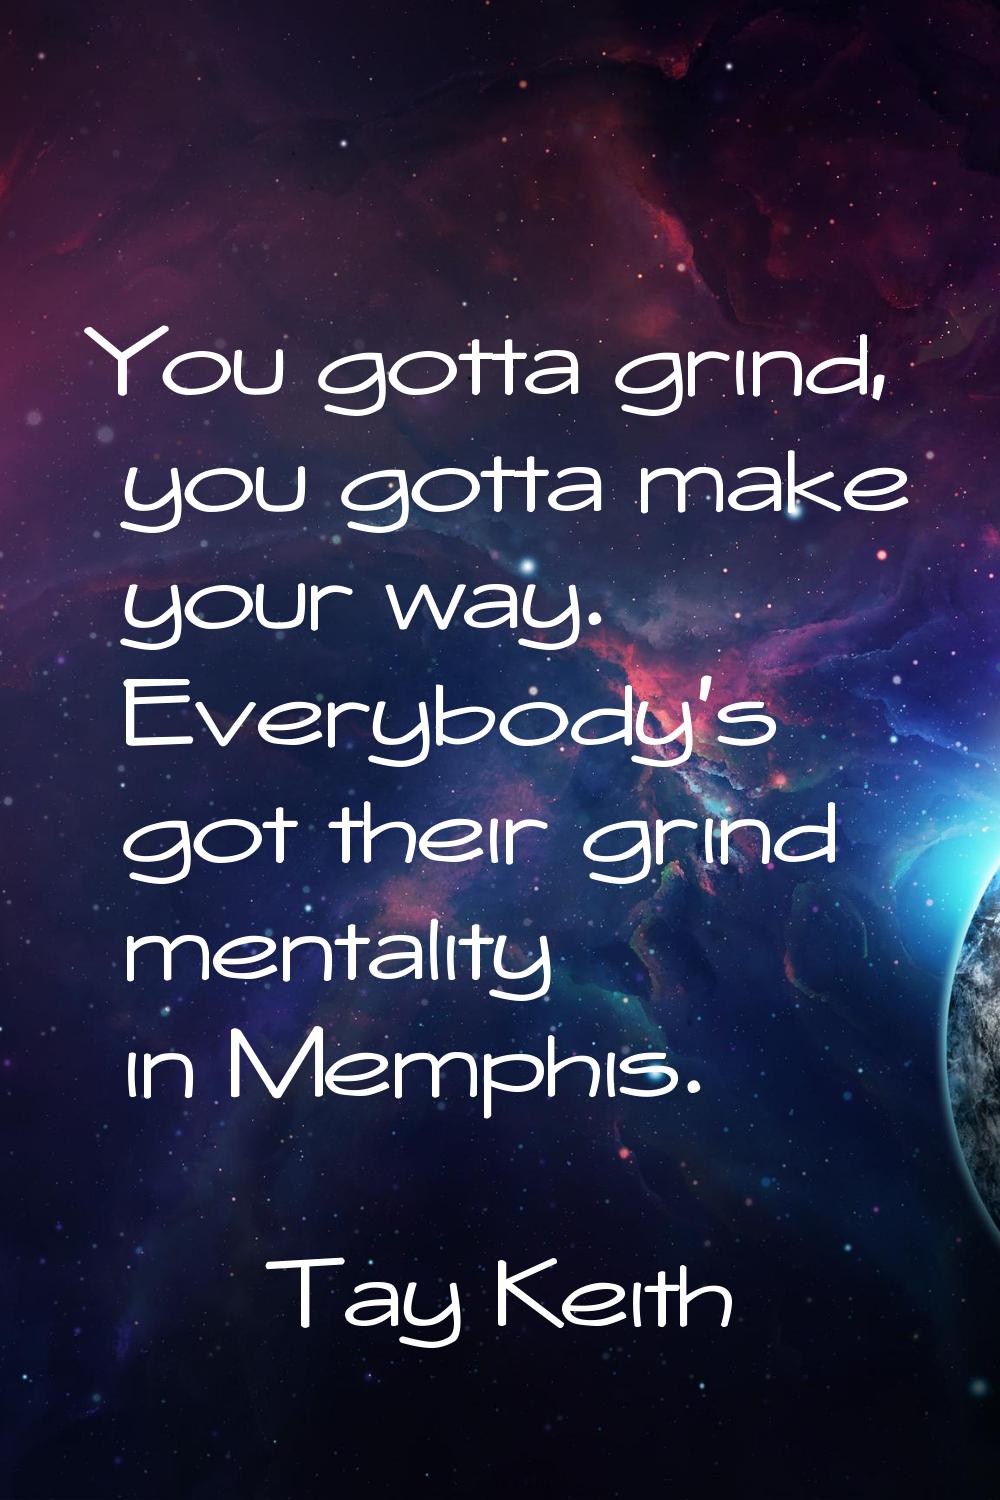 You gotta grind, you gotta make your way. Everybody's got their grind mentality in Memphis.